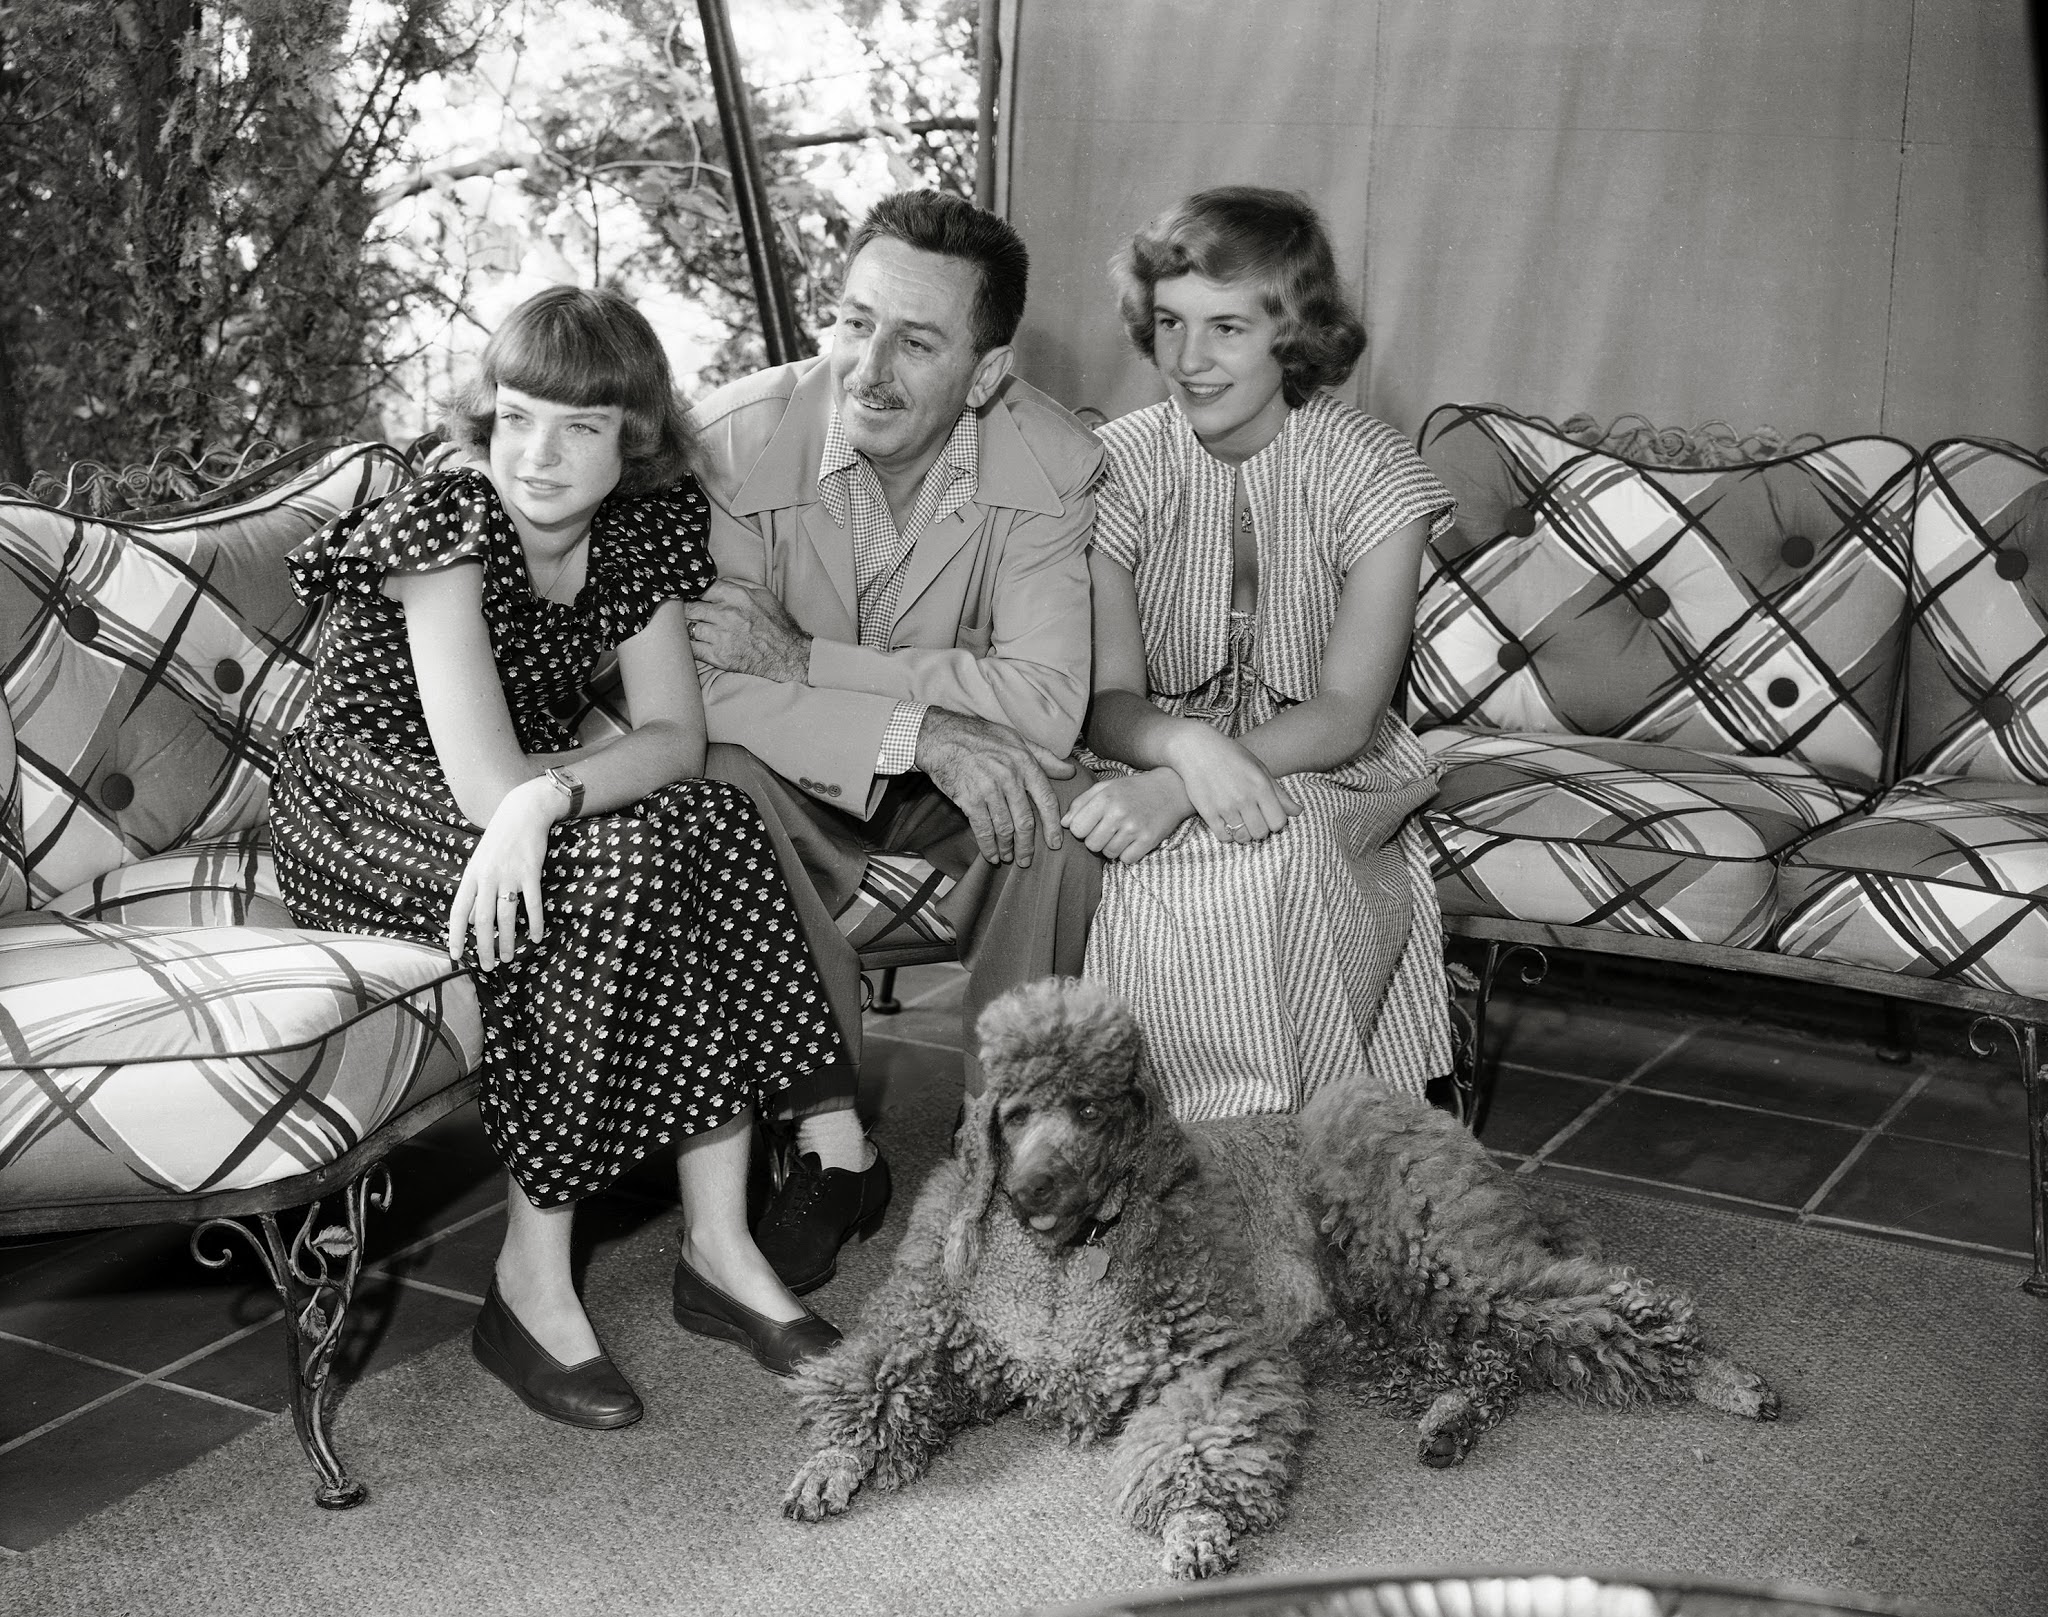 Walt Disney sitting on the couch with his family and their poodle lying on the floor next to their feet